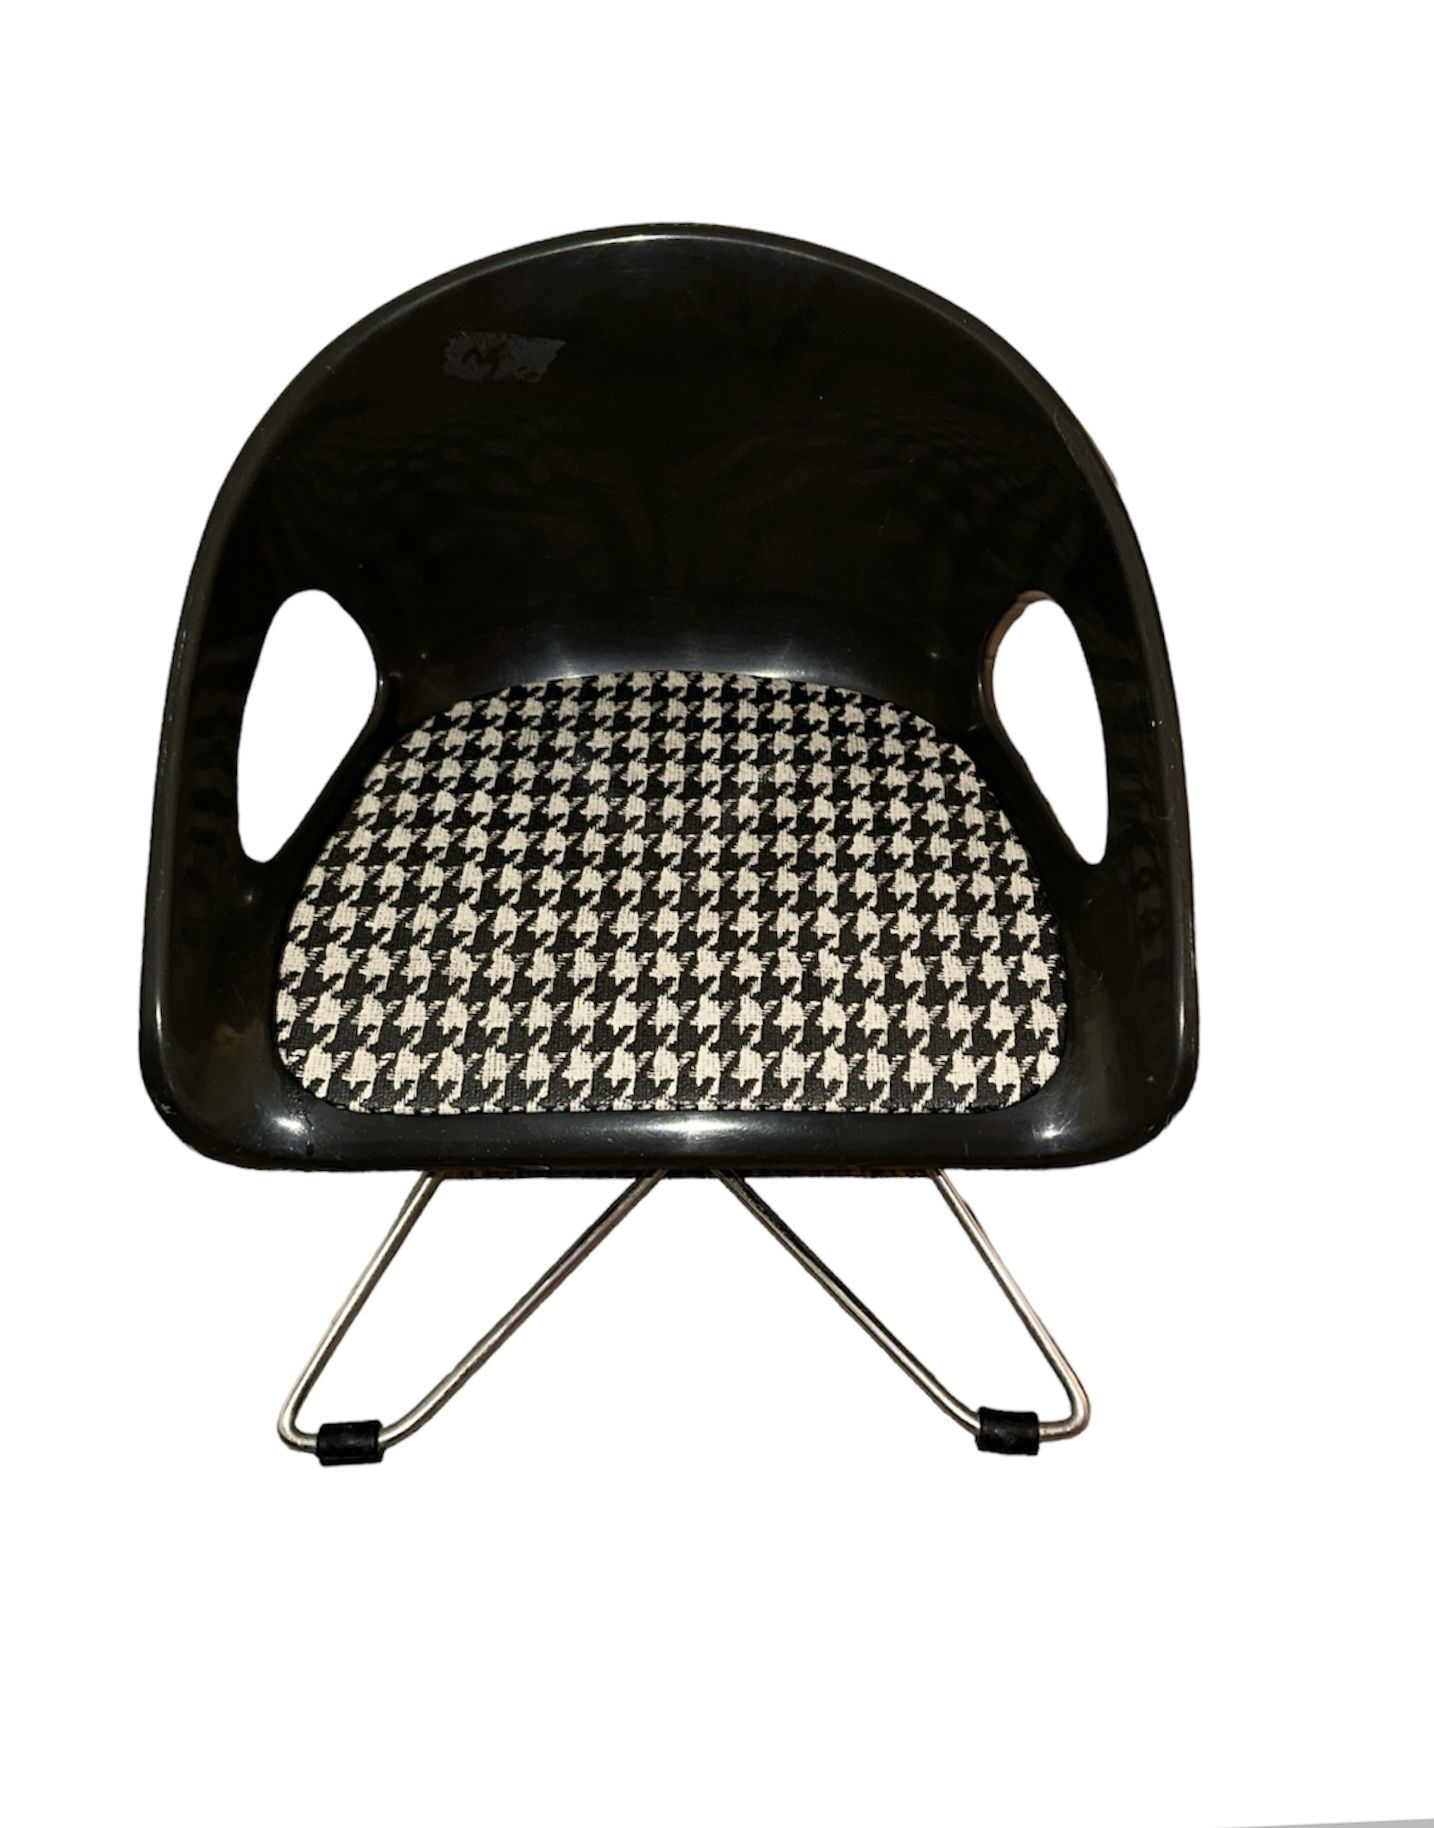 COSCO MID CENTURY MODERN BABY CHILD Booster ADJUSTABLE HOUNDSTOOTH CHAIR—Cute Pet Chair!